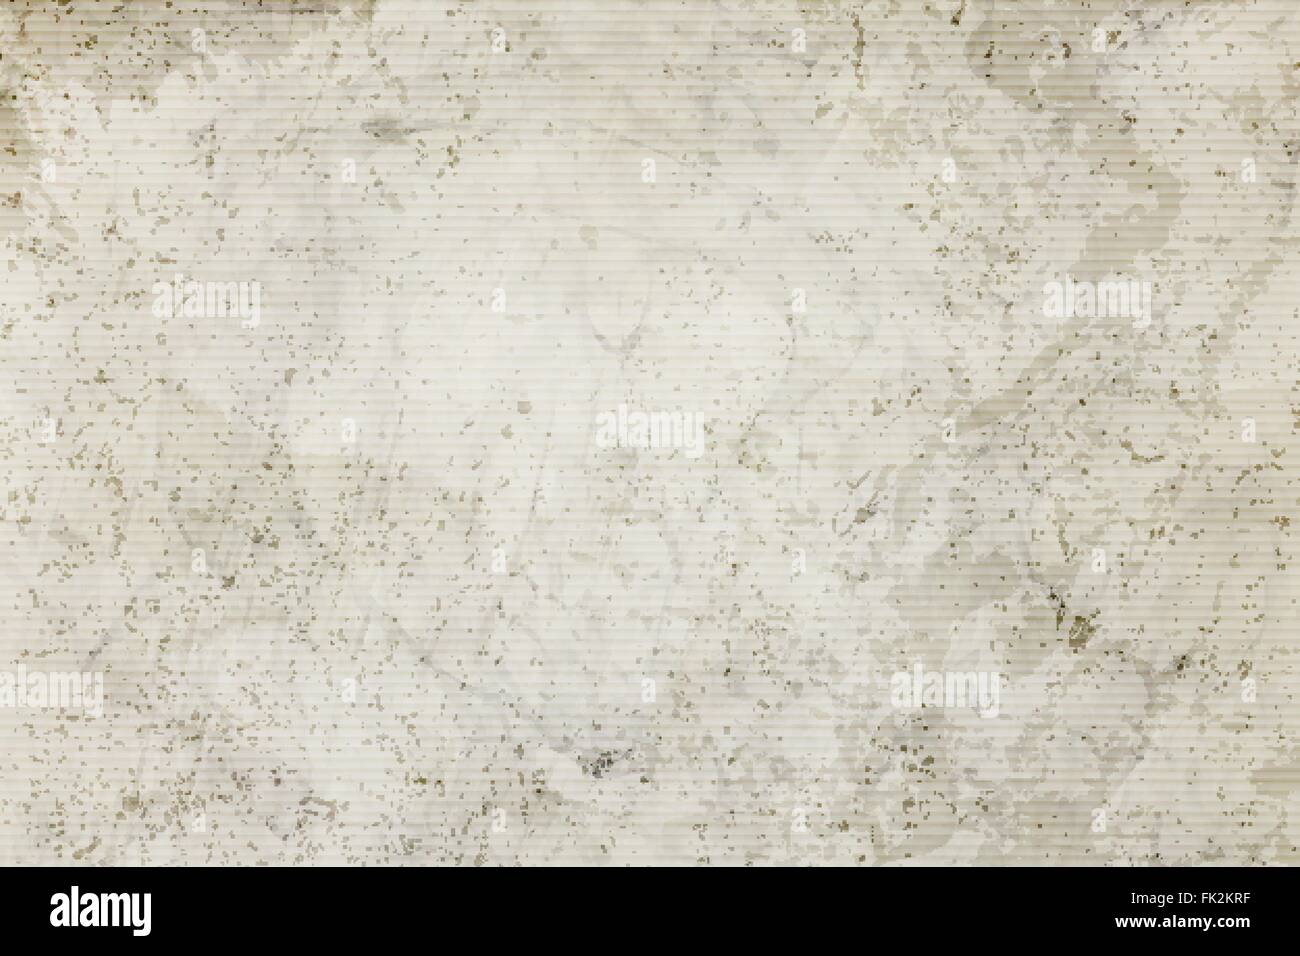 abstract, grunge wall surface. vector, old paper texture. grungy, distressed, industrial background design. rough wallpaper with Stock Vector